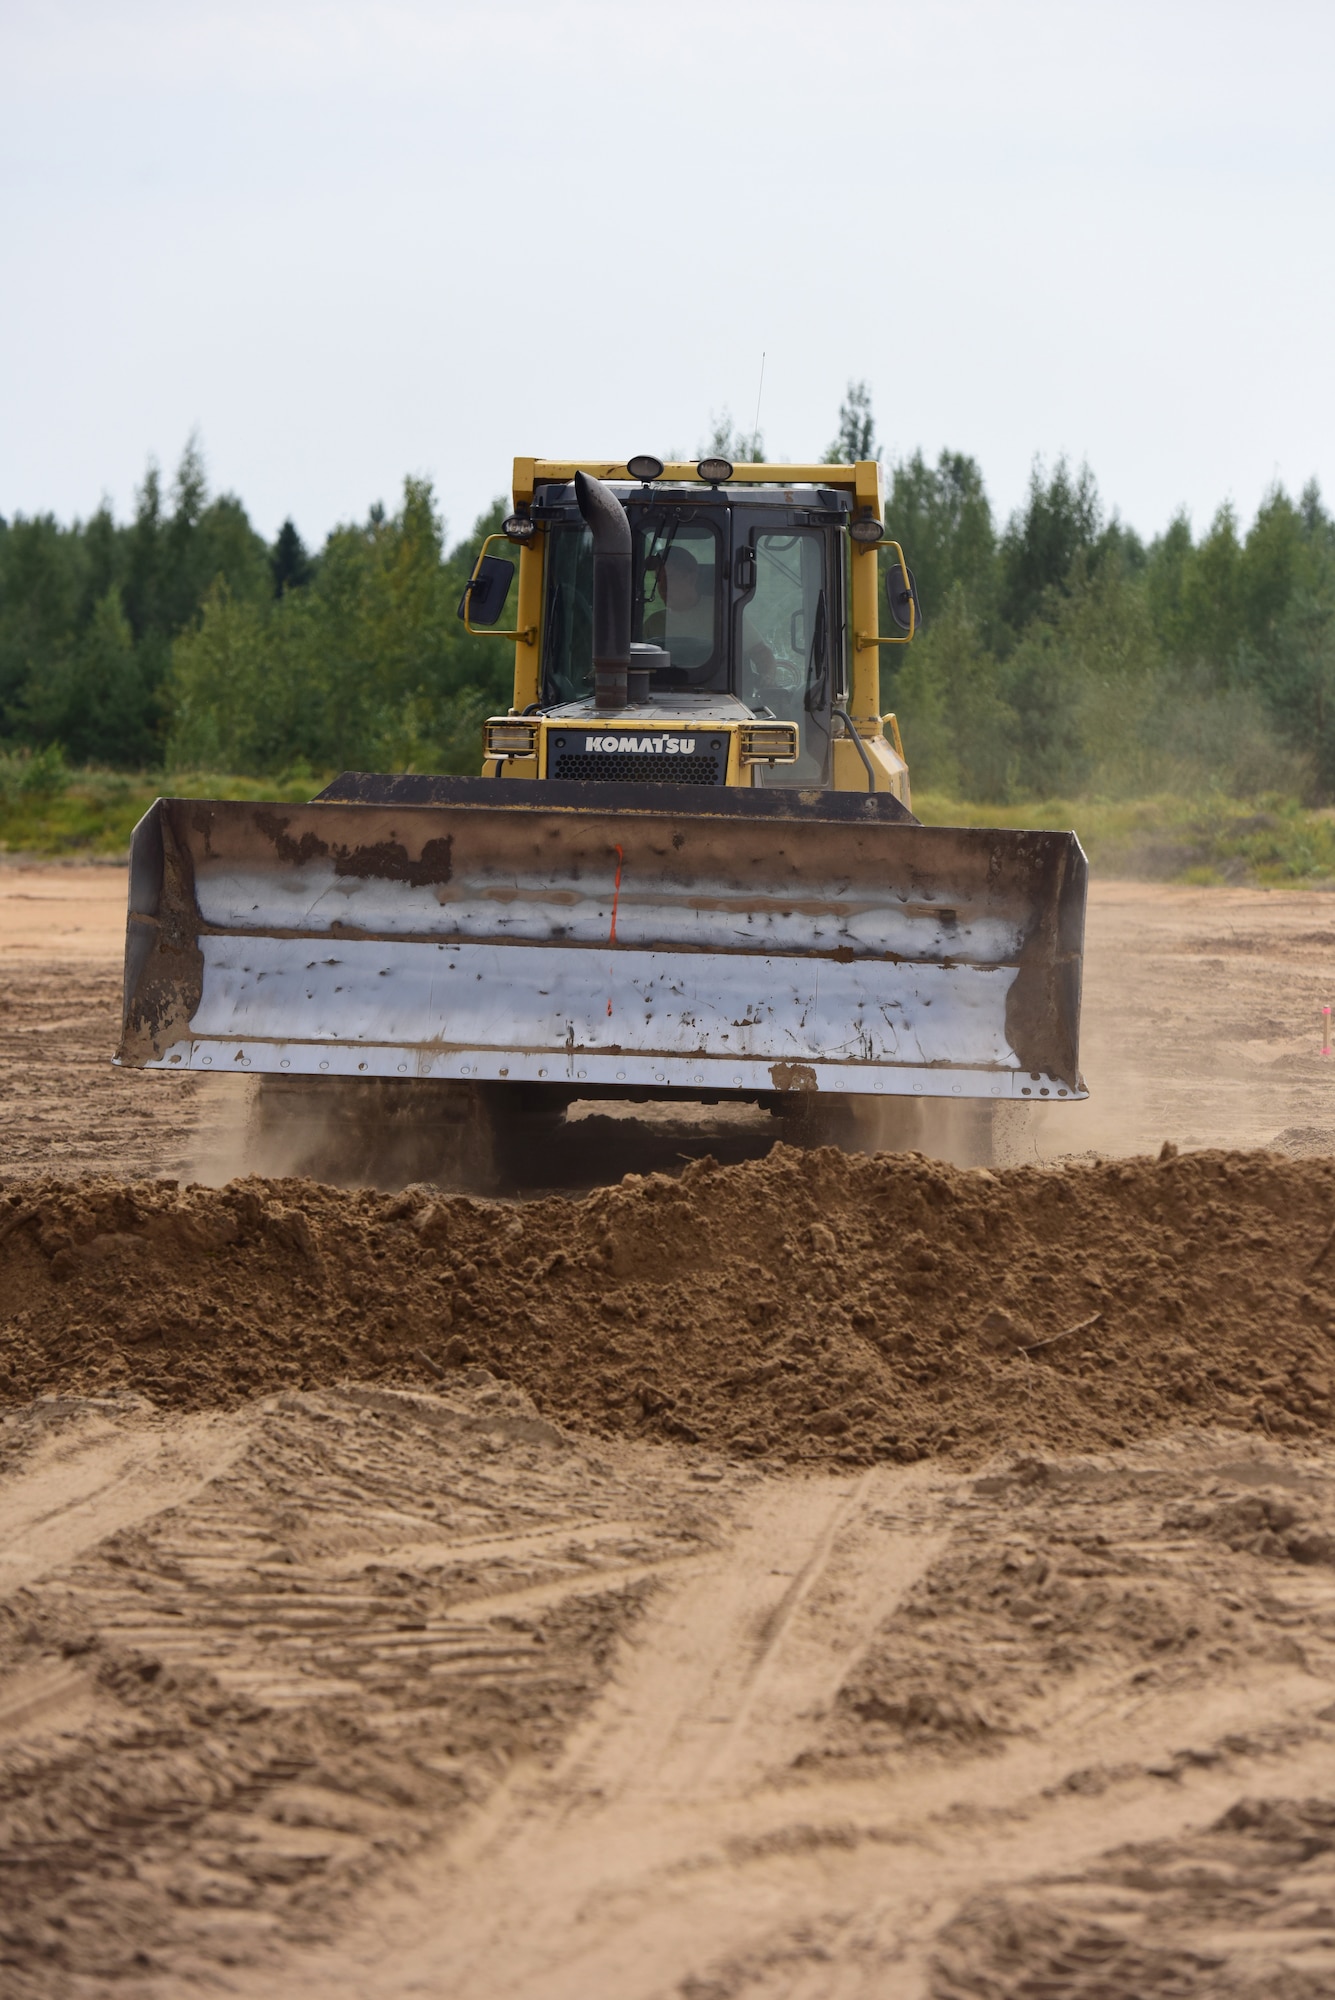 Tech. Sgt. Jacob Wallace, airfields team lead with the 201st Rapid Engineer Deployable Heavy Operational Repair Squadron Engineers, operates a bulldozer to clear the ground in the process of creating a military air-to-ground training range at Brigadier General Kazio Veverskis Training Grounds, Kazlu Ruda, Lithuania, Aug. 14, 2018. The range will include a mock village, bomb circle, simulated runway, fire break, strafe pit and an observation point to be used by Lithuanian and other NATO forces. (U.S. Air National Guard photo by Tech. Sgt. Claire Behney/Released)